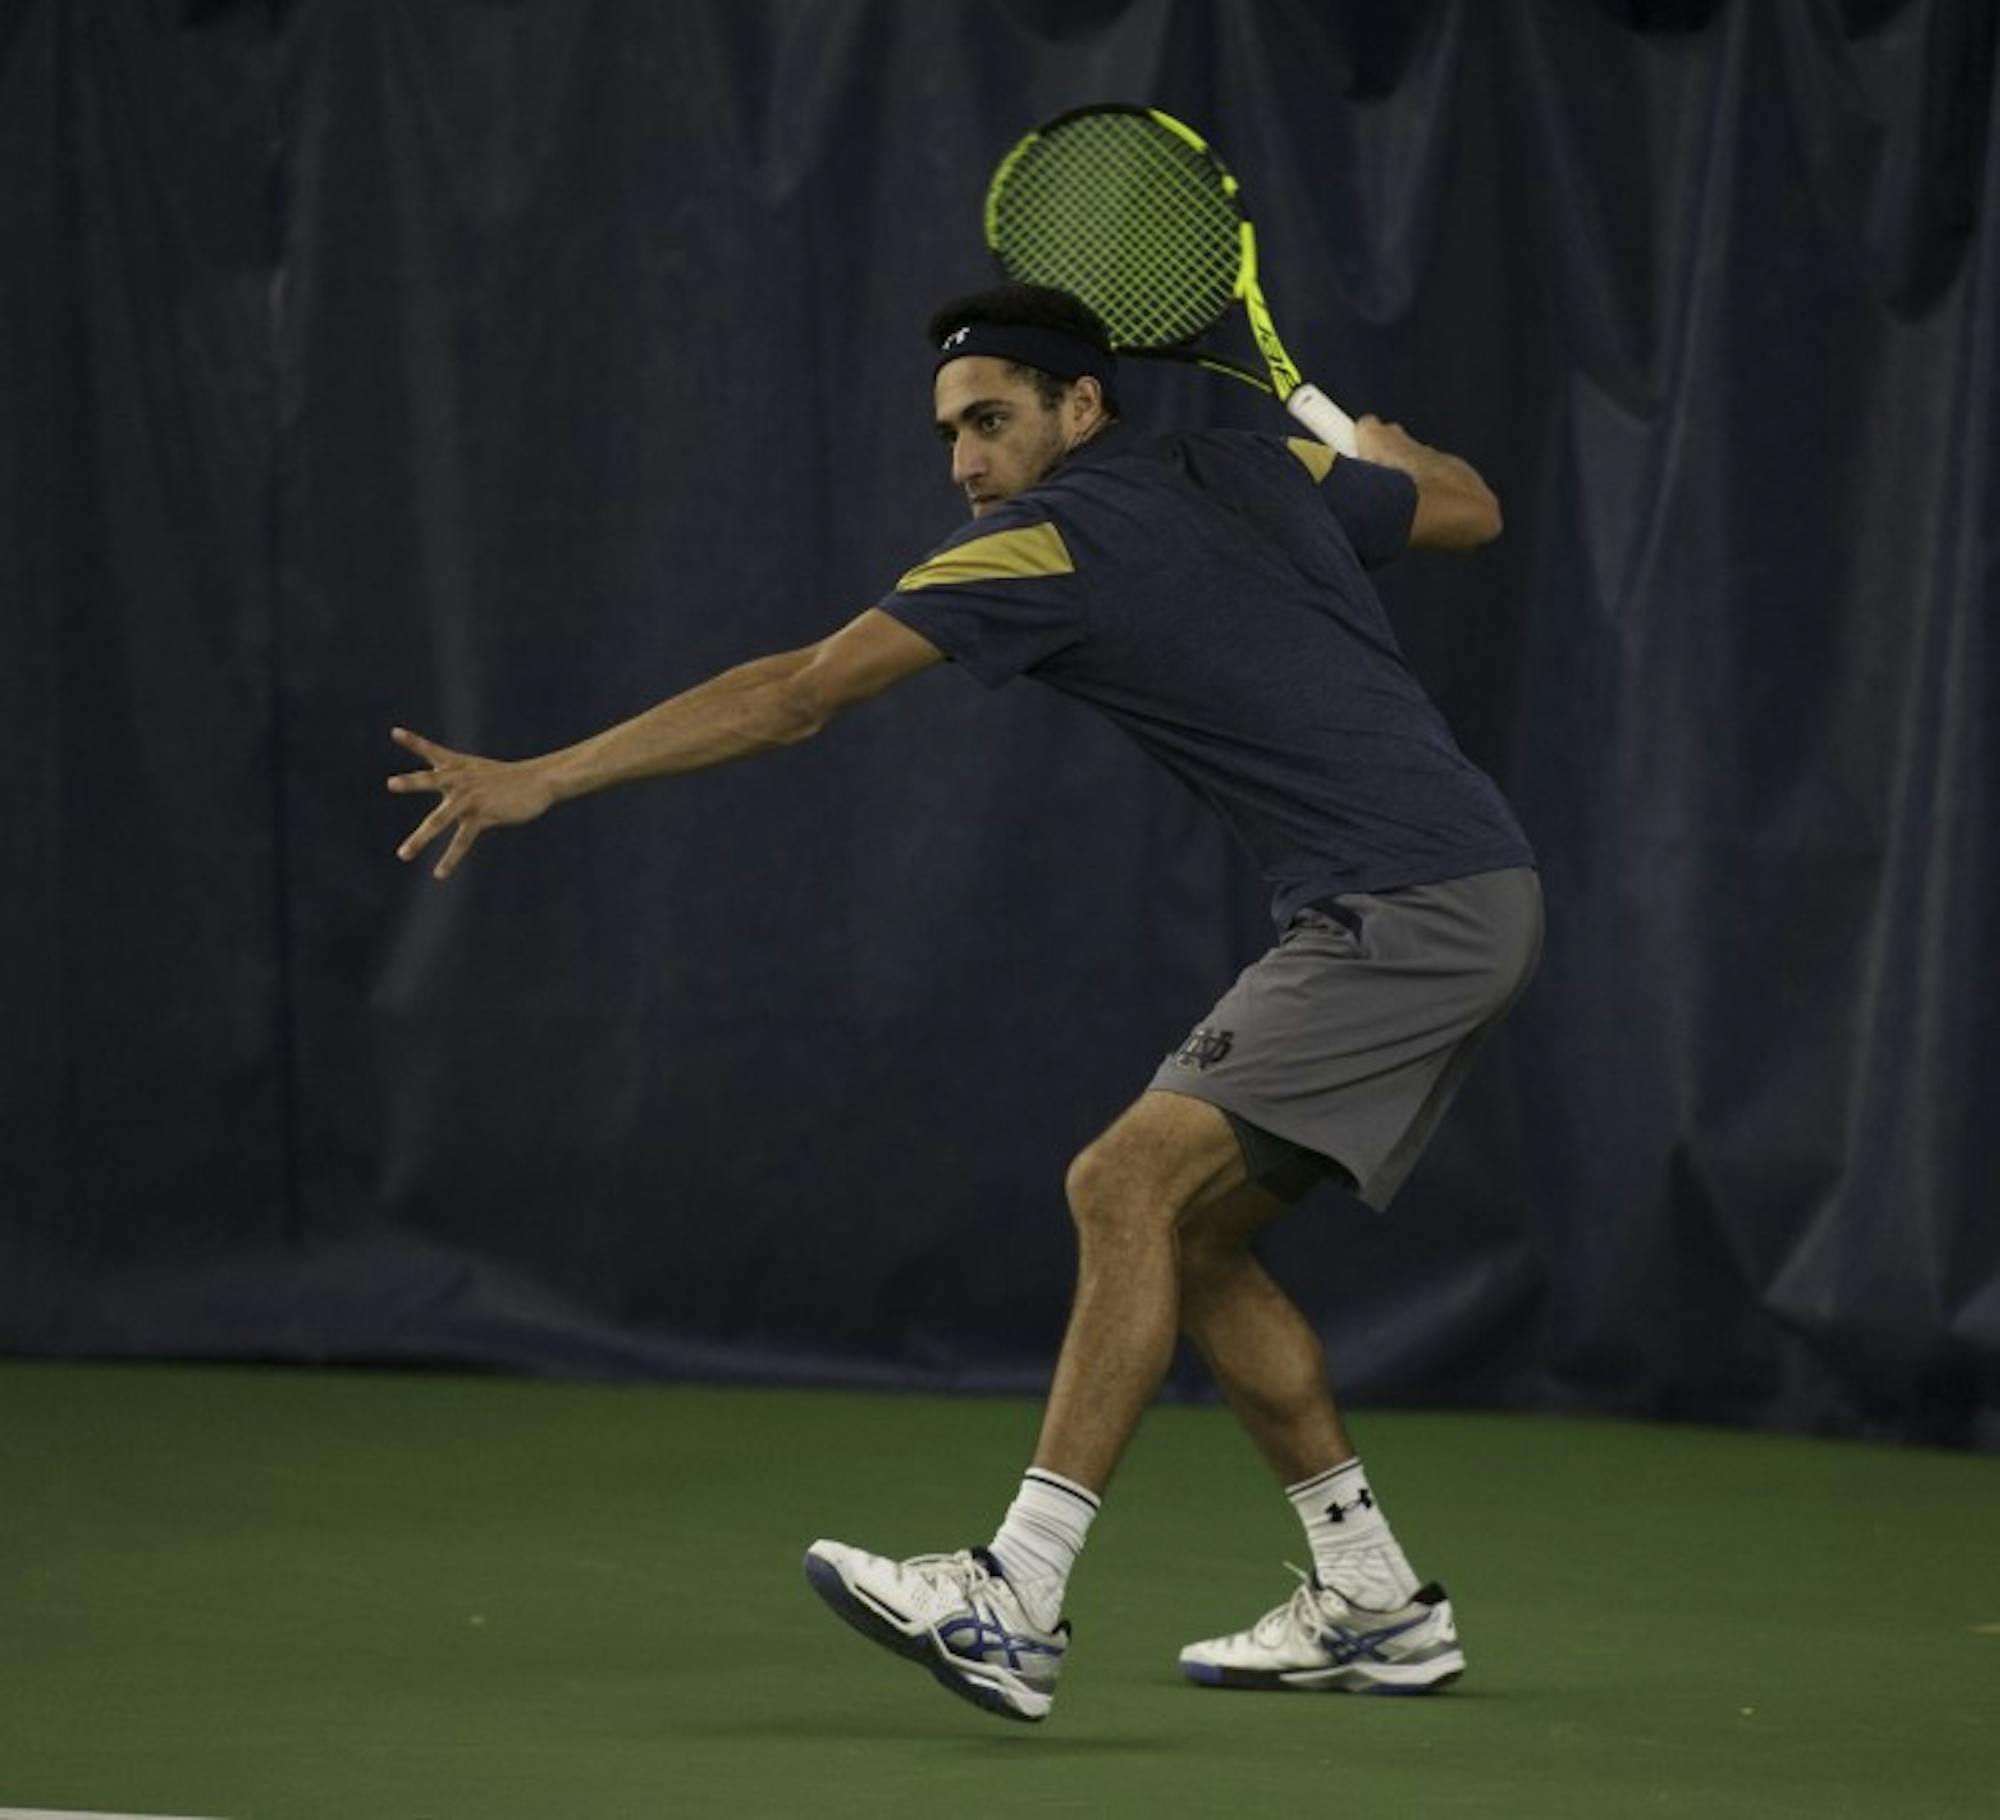 Irish sophomore Grayson Broadus prepares to hit a forehand during Notre Dame’s 4-1 win over Northwestern on Feb. 24 at Eck Tennis Pavilion. Broadus lost his doubles match to the Wildcats.